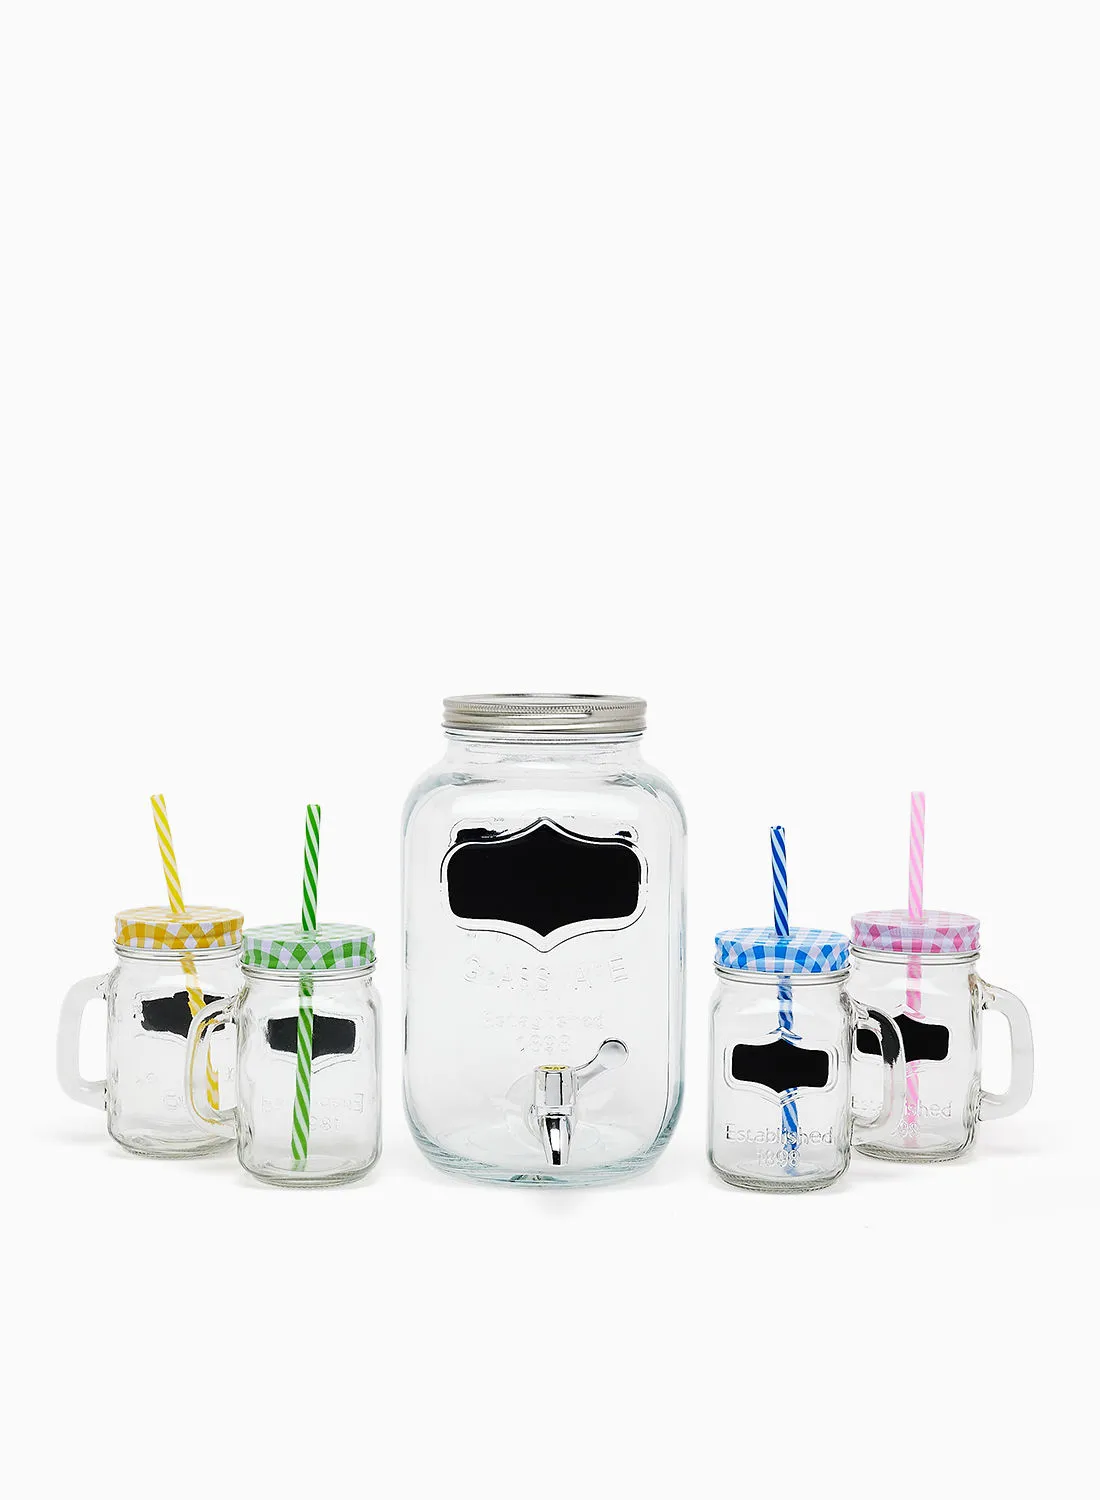 noon east Glass Beverage Dispenser Set - 4L Beverage Dispenser + 4 Mason Jars - Beverage Glasses With Lid And Straw For Juices Glass By Noon East - Beverage Dispenser, Mason Jars - Serves 4 - Clear